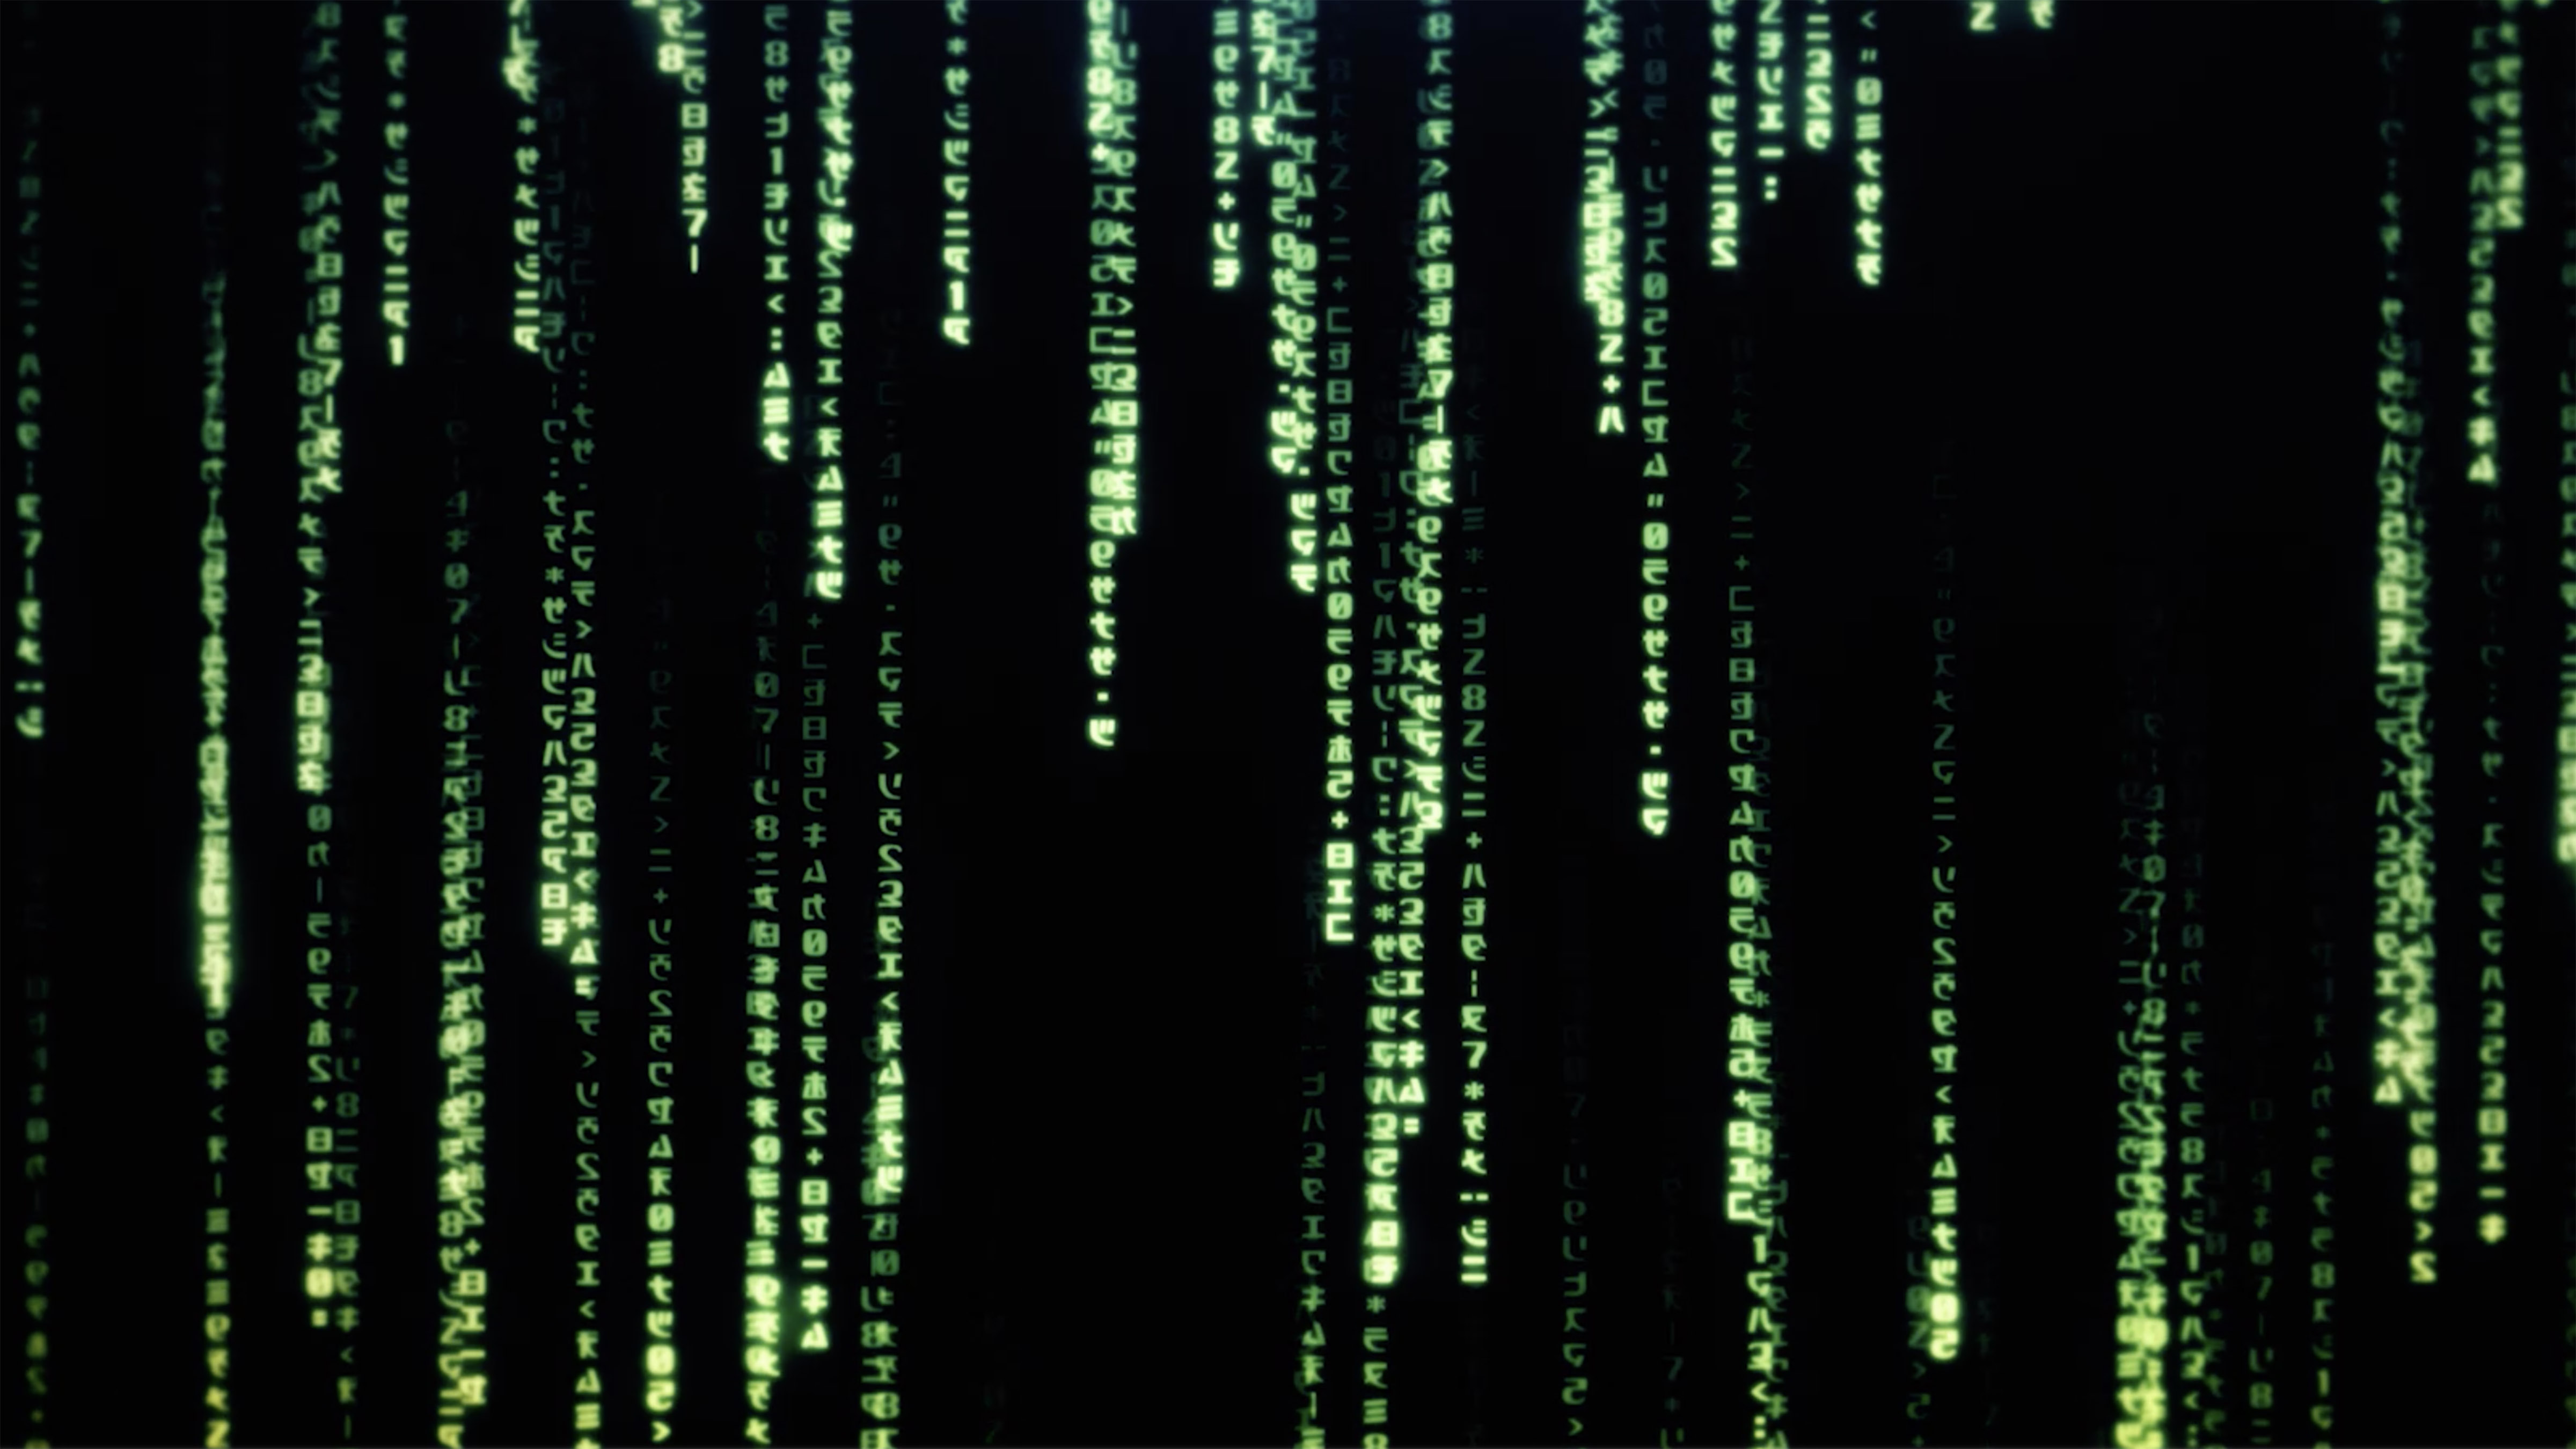 The Matrix 4 trailer is coming this week, as the old Matrix site is